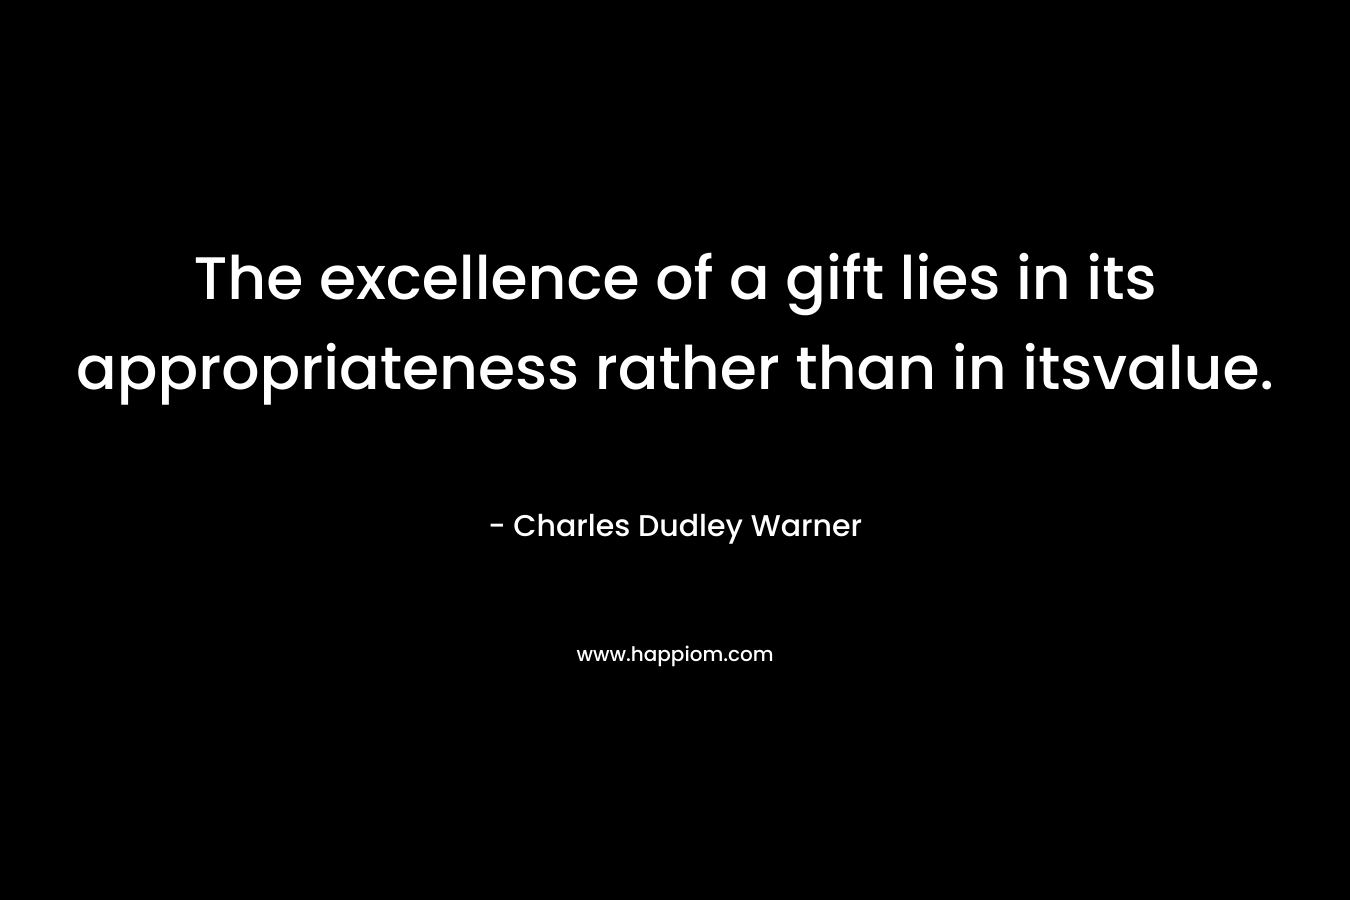 The excellence of a gift lies in its appropriateness rather than in itsvalue.